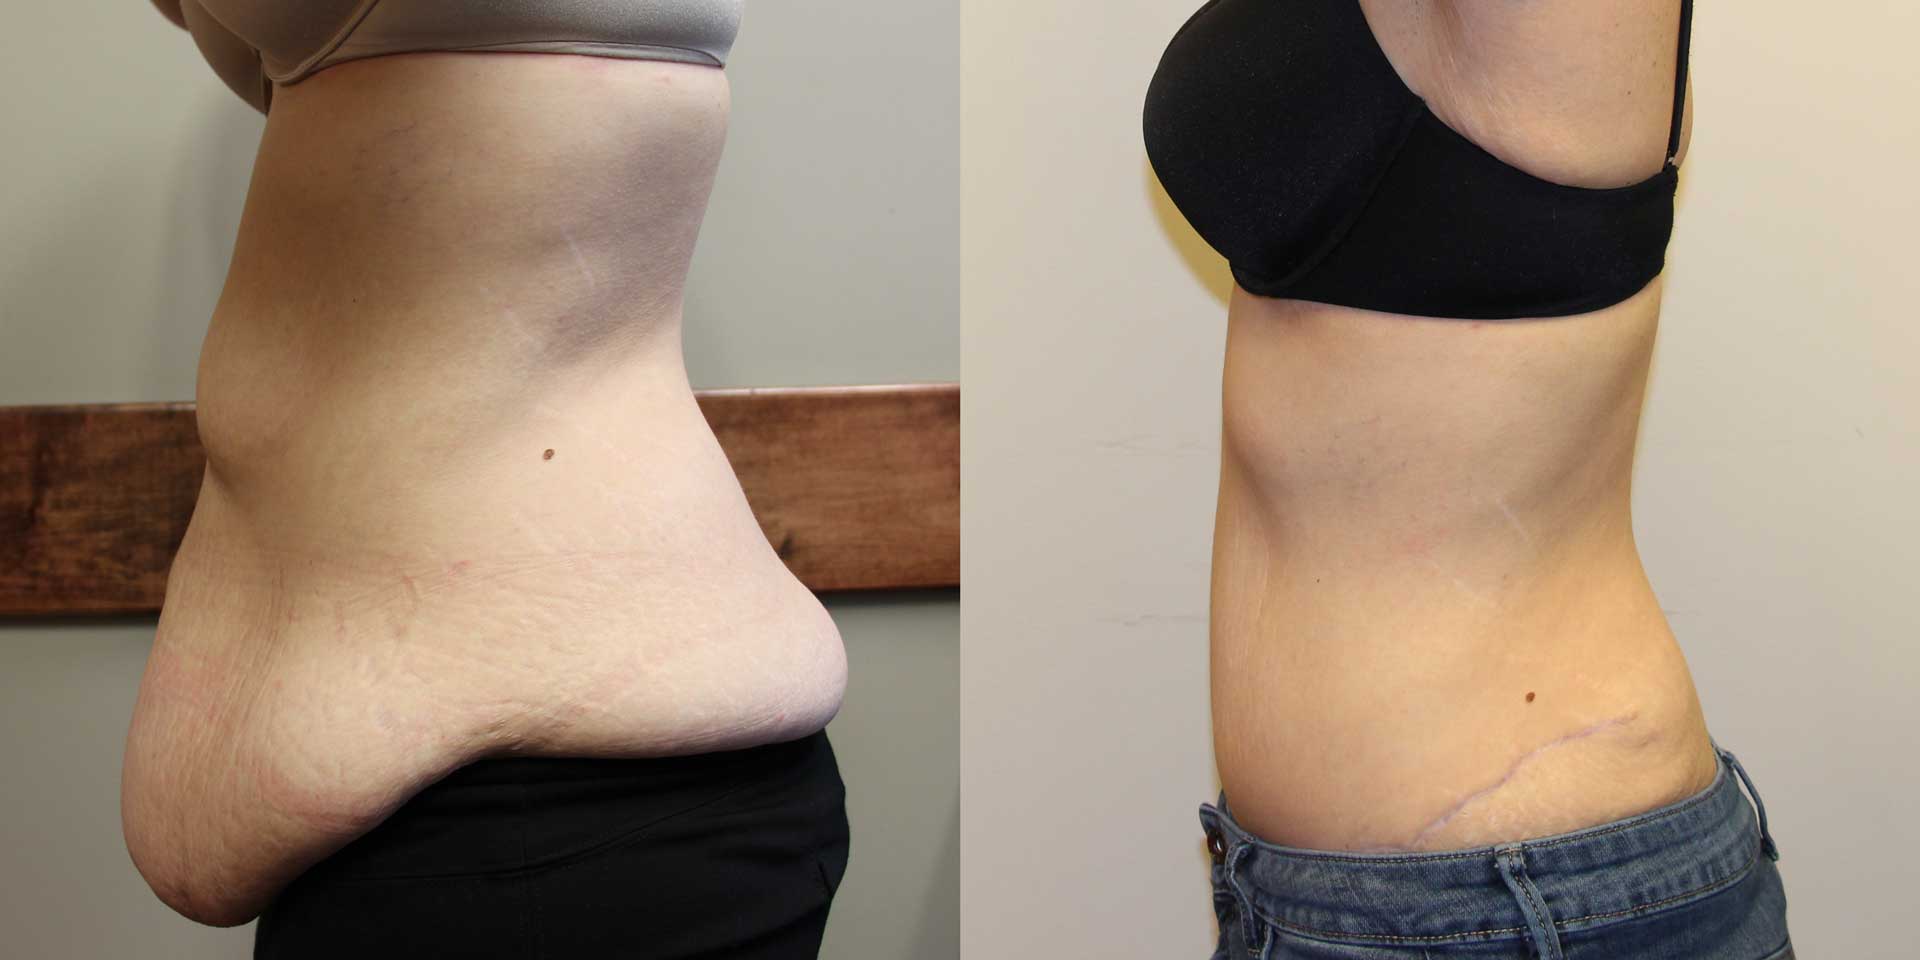 Tummy Tuck (Abdominoplasty) Before and After Photos - Dr Anzarut Plastic  Surgery